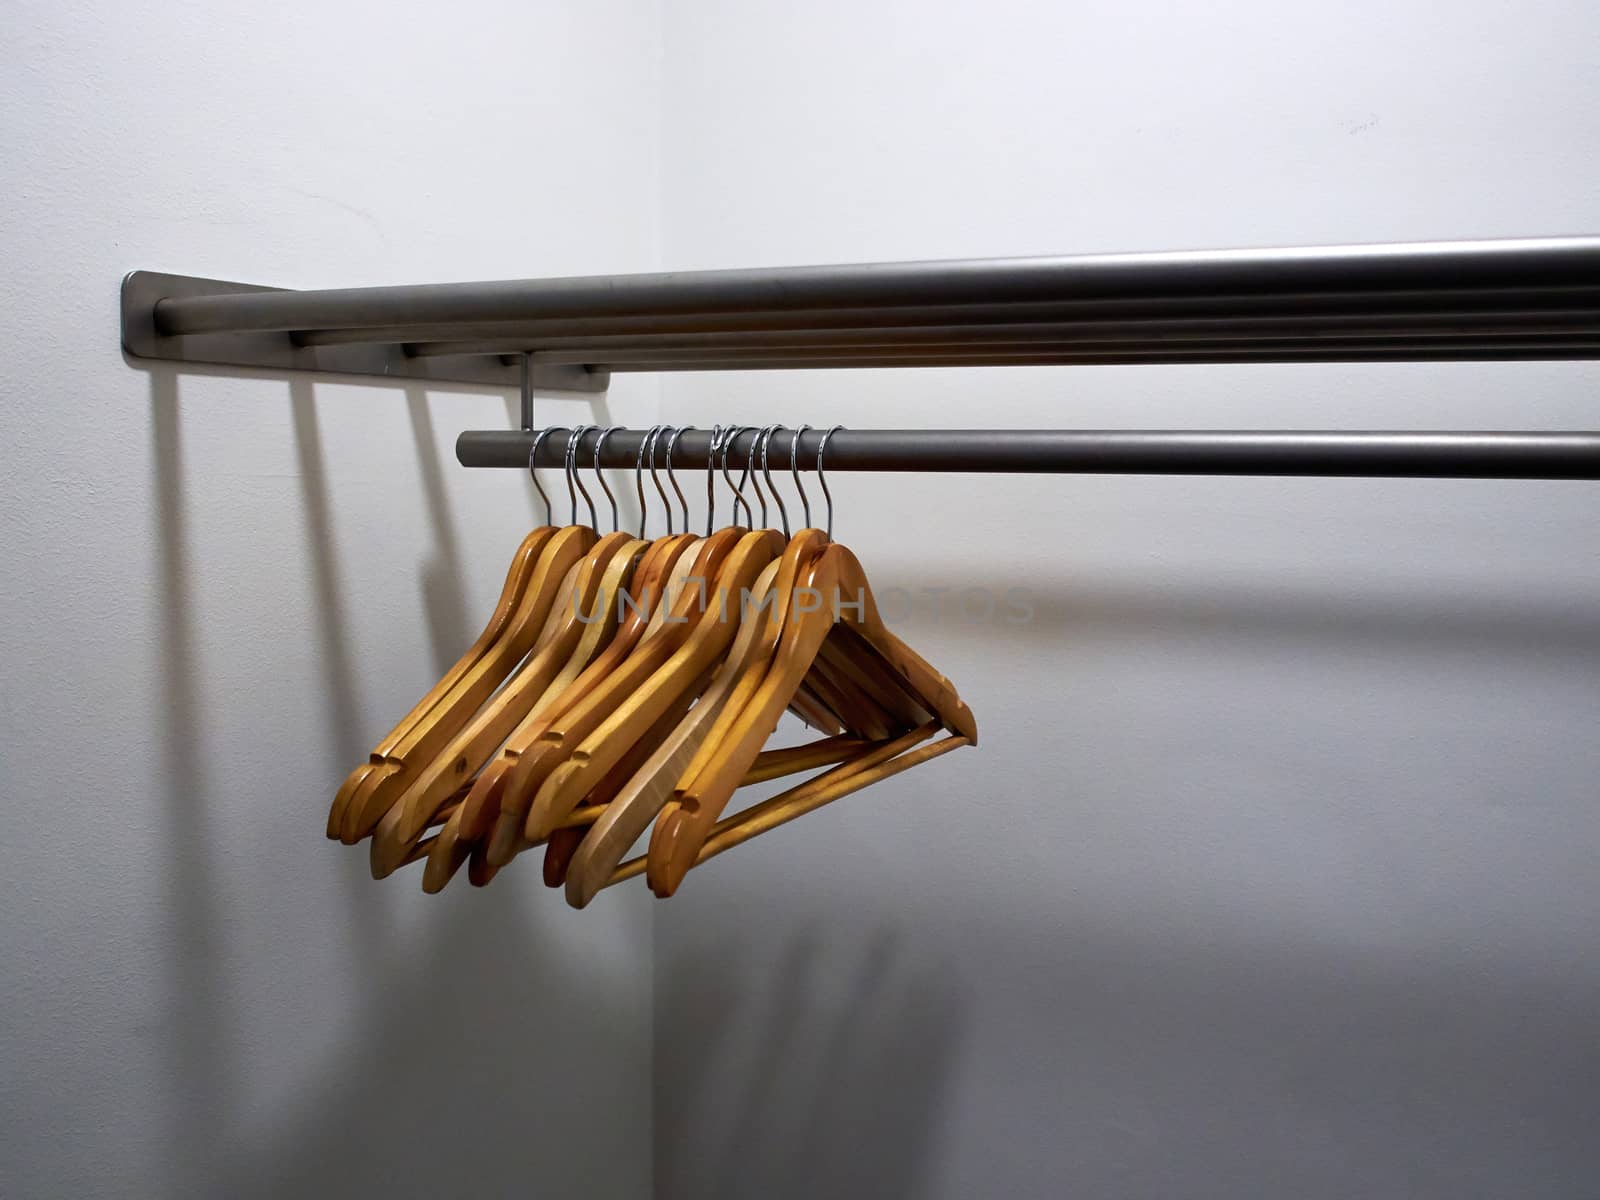 Wooden clothes hangers by Ronyzmbow